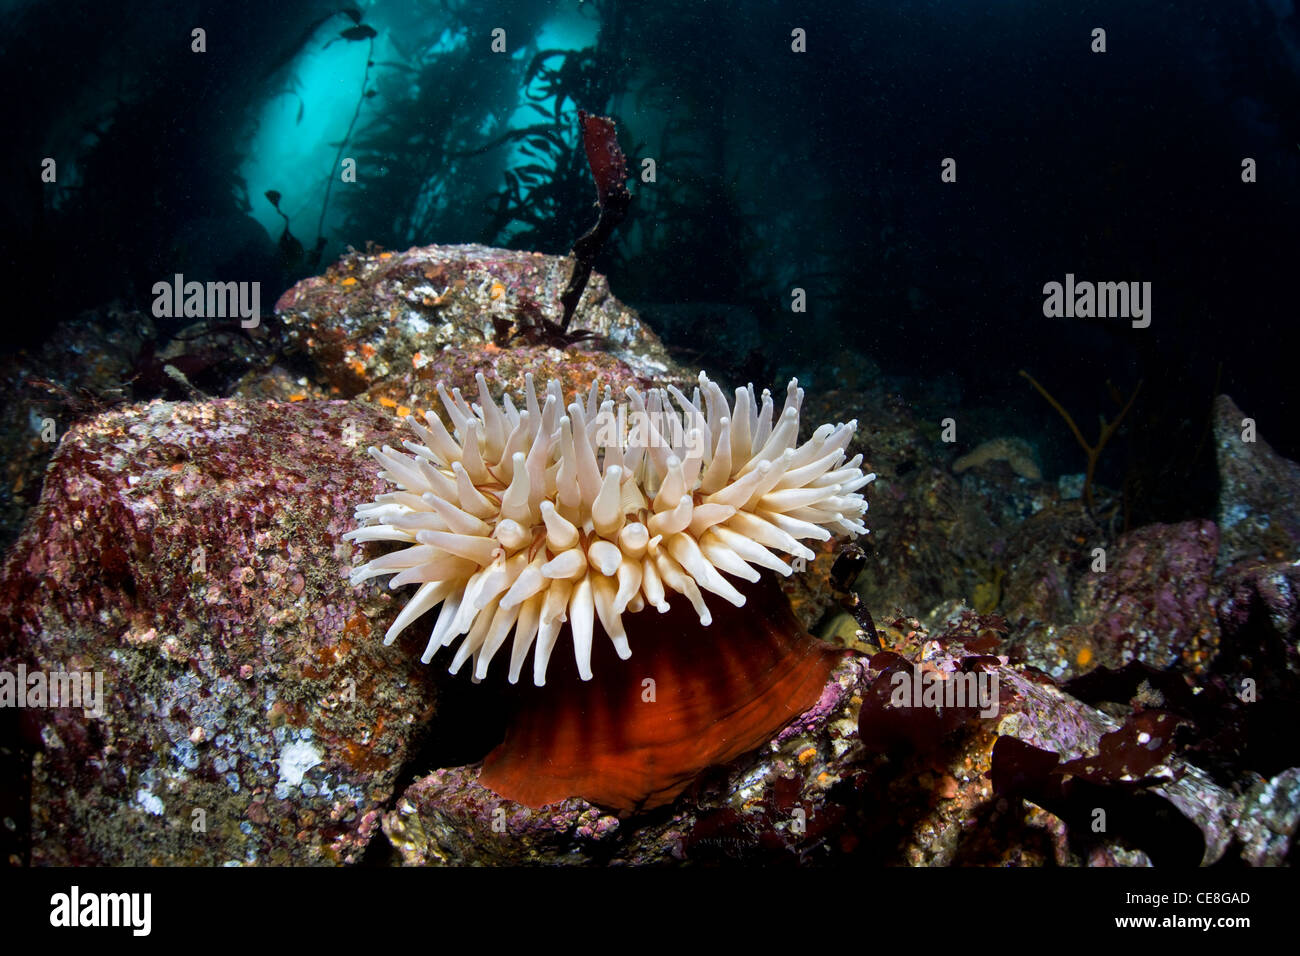 A fish-eating anemone (Urticina piscivora) grows in the cold coast waters of a kelp forest in the eastern Pacific Ocean. Stock Photo